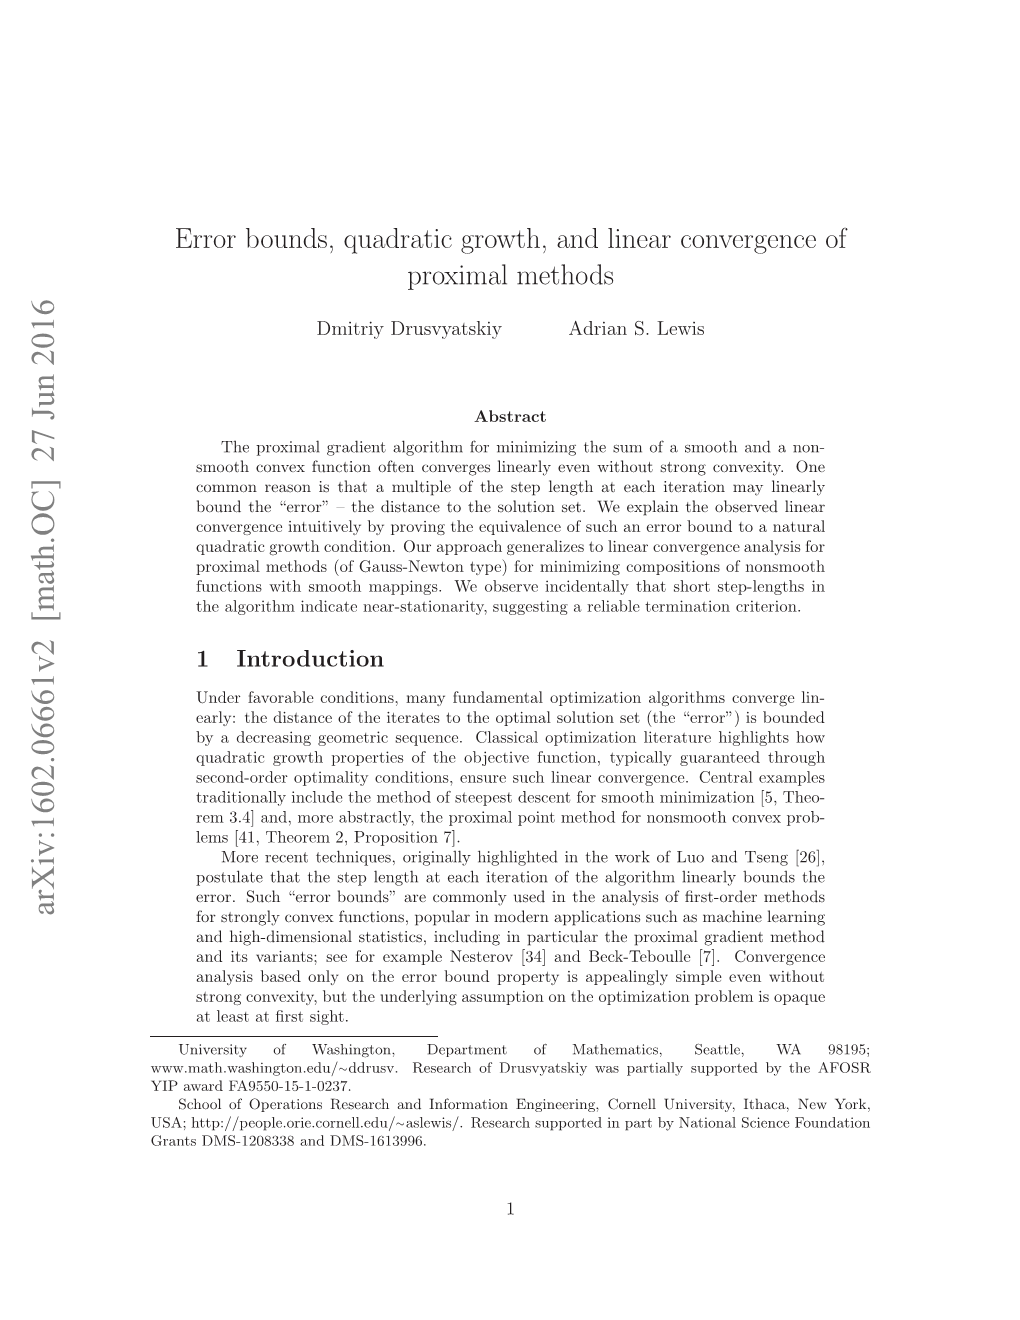 Error Bounds, Quadratic Growth, and Linear Convergence of Proximal Methods